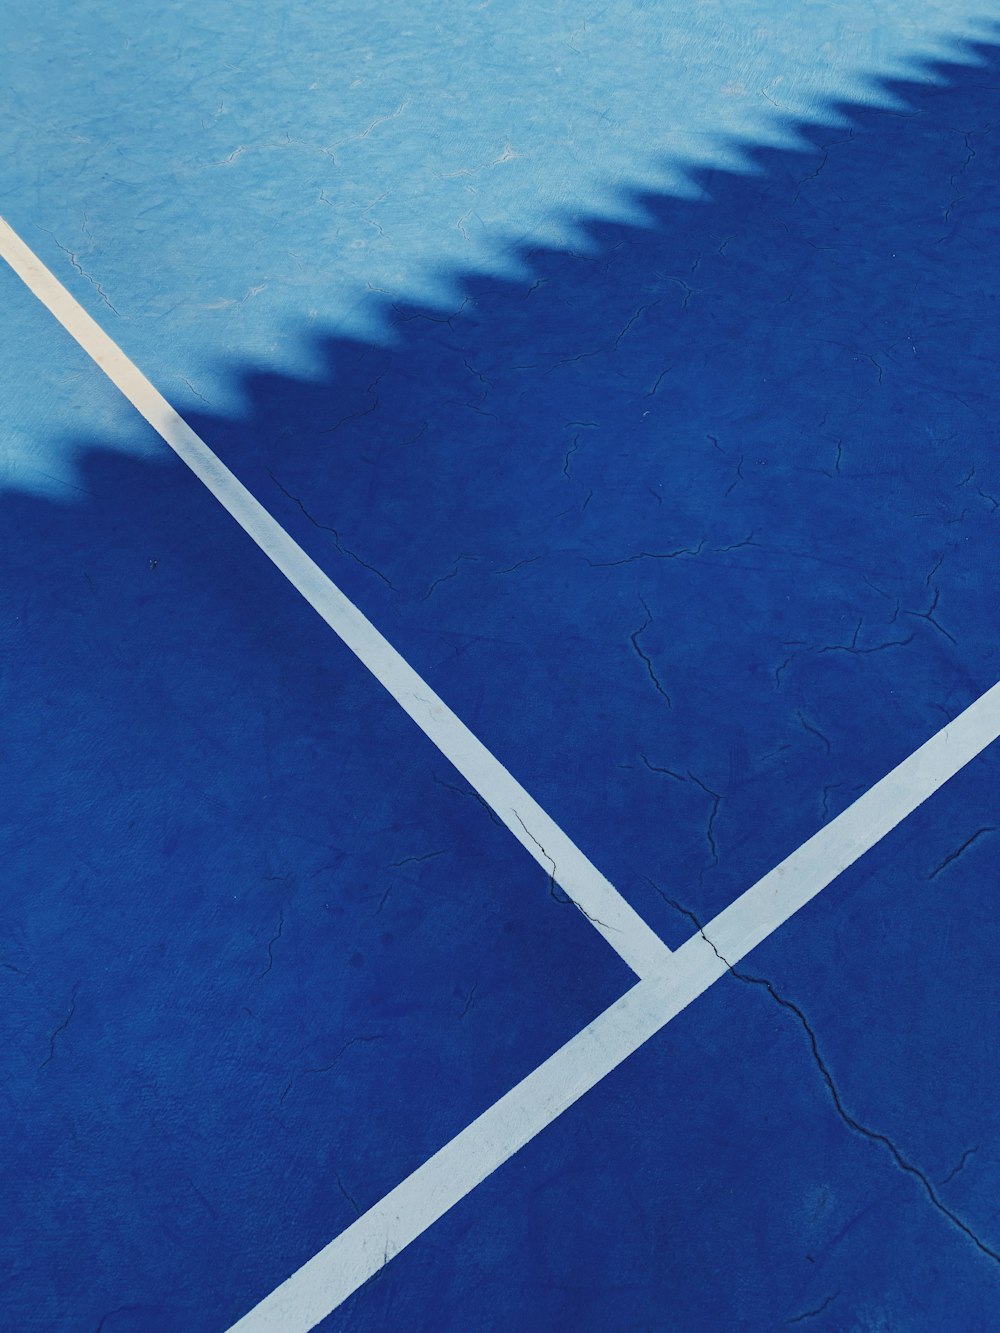 a shadow of a tennis player on a tennis court